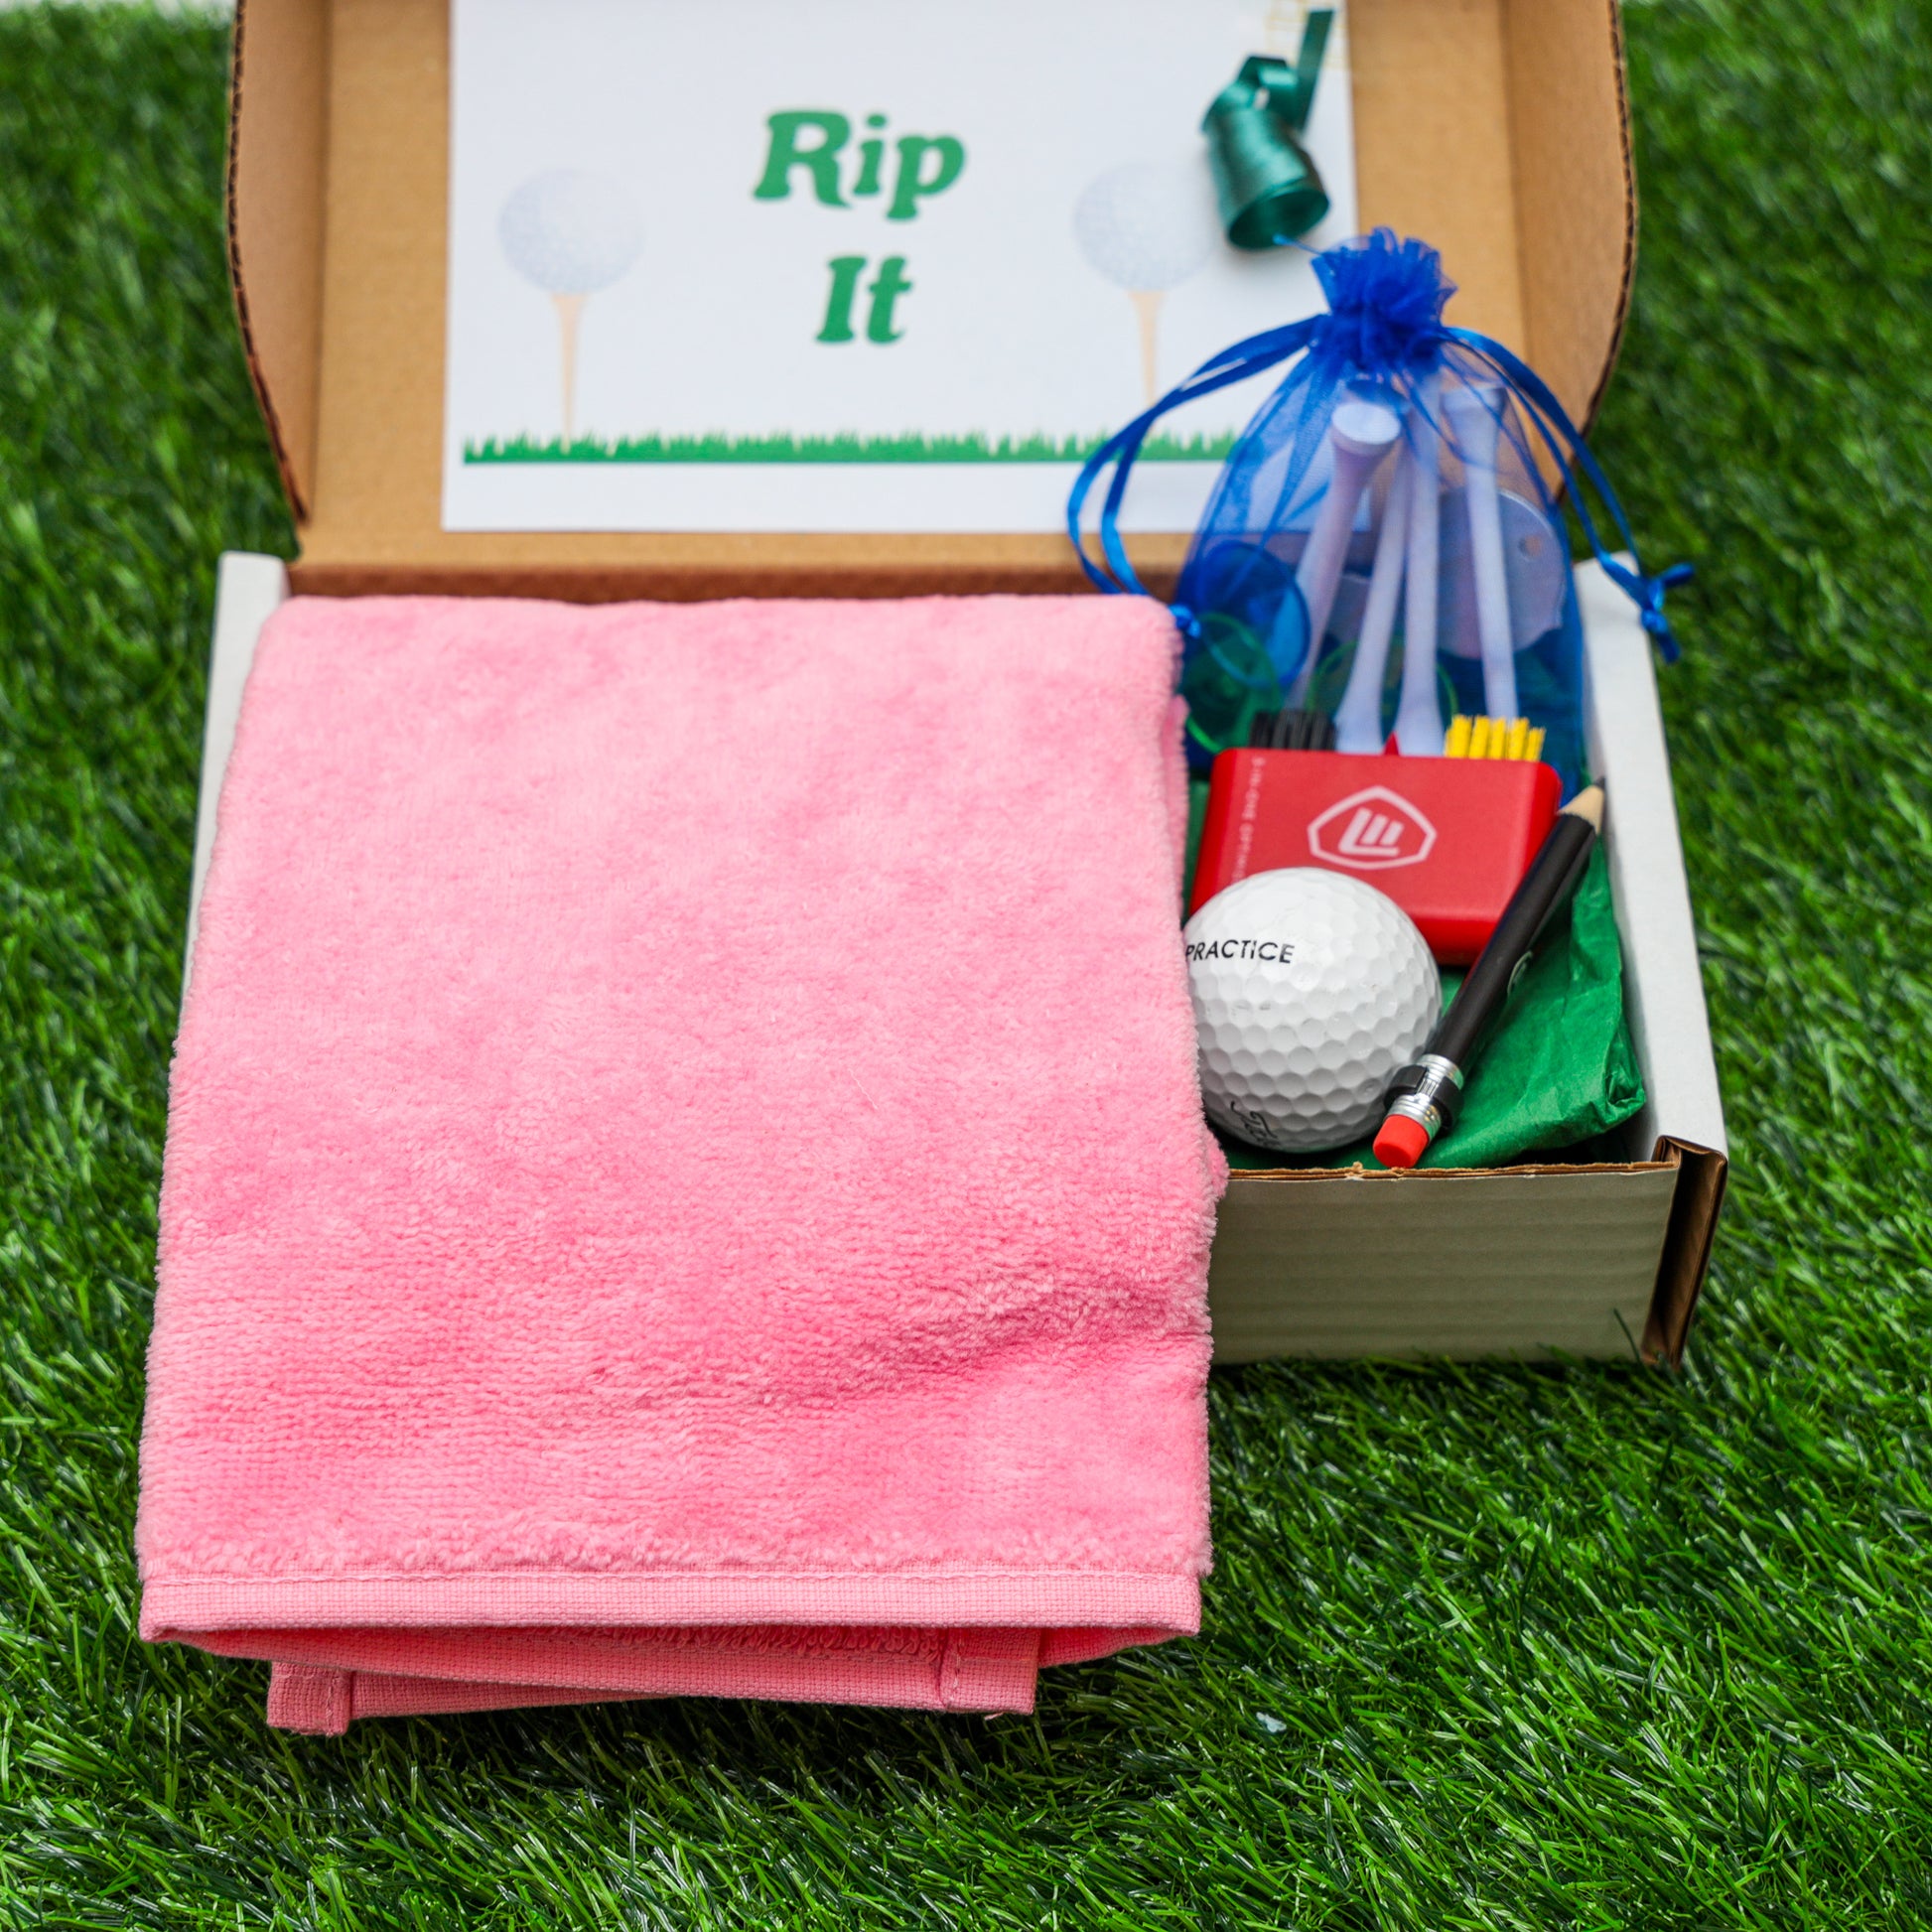 Personalised Tri Fold Golf Towel with Name Golfing Gift Box  - Always Looking Good - Pink Towel  